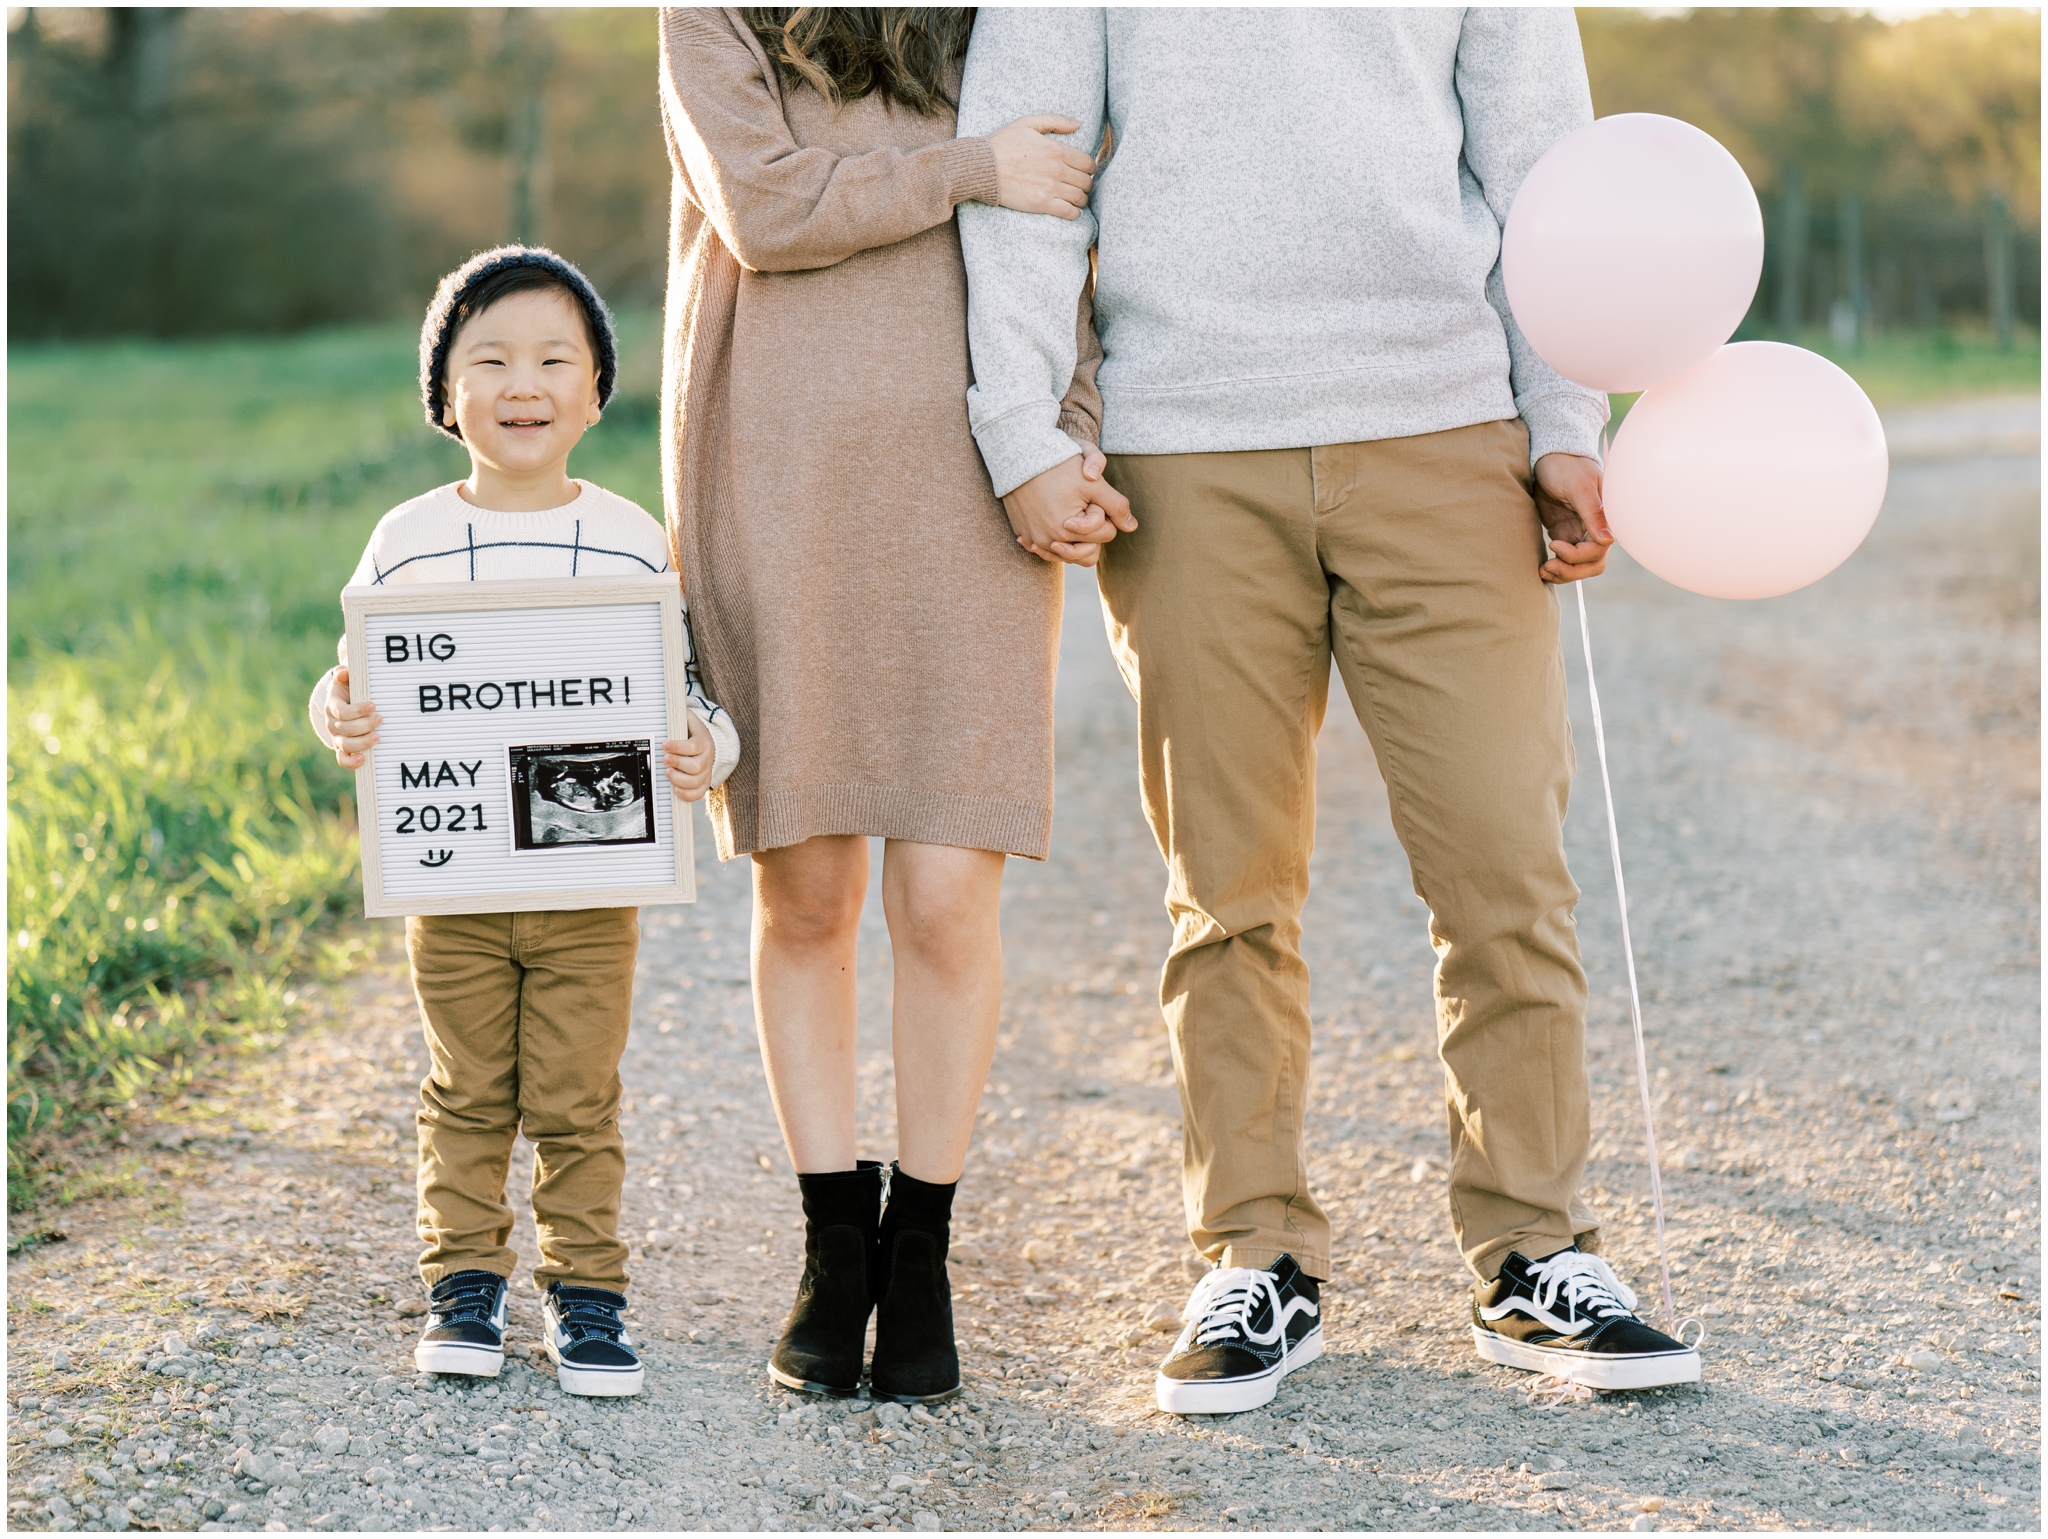 The sweetest baby announcement photo ever in Cumming, GA